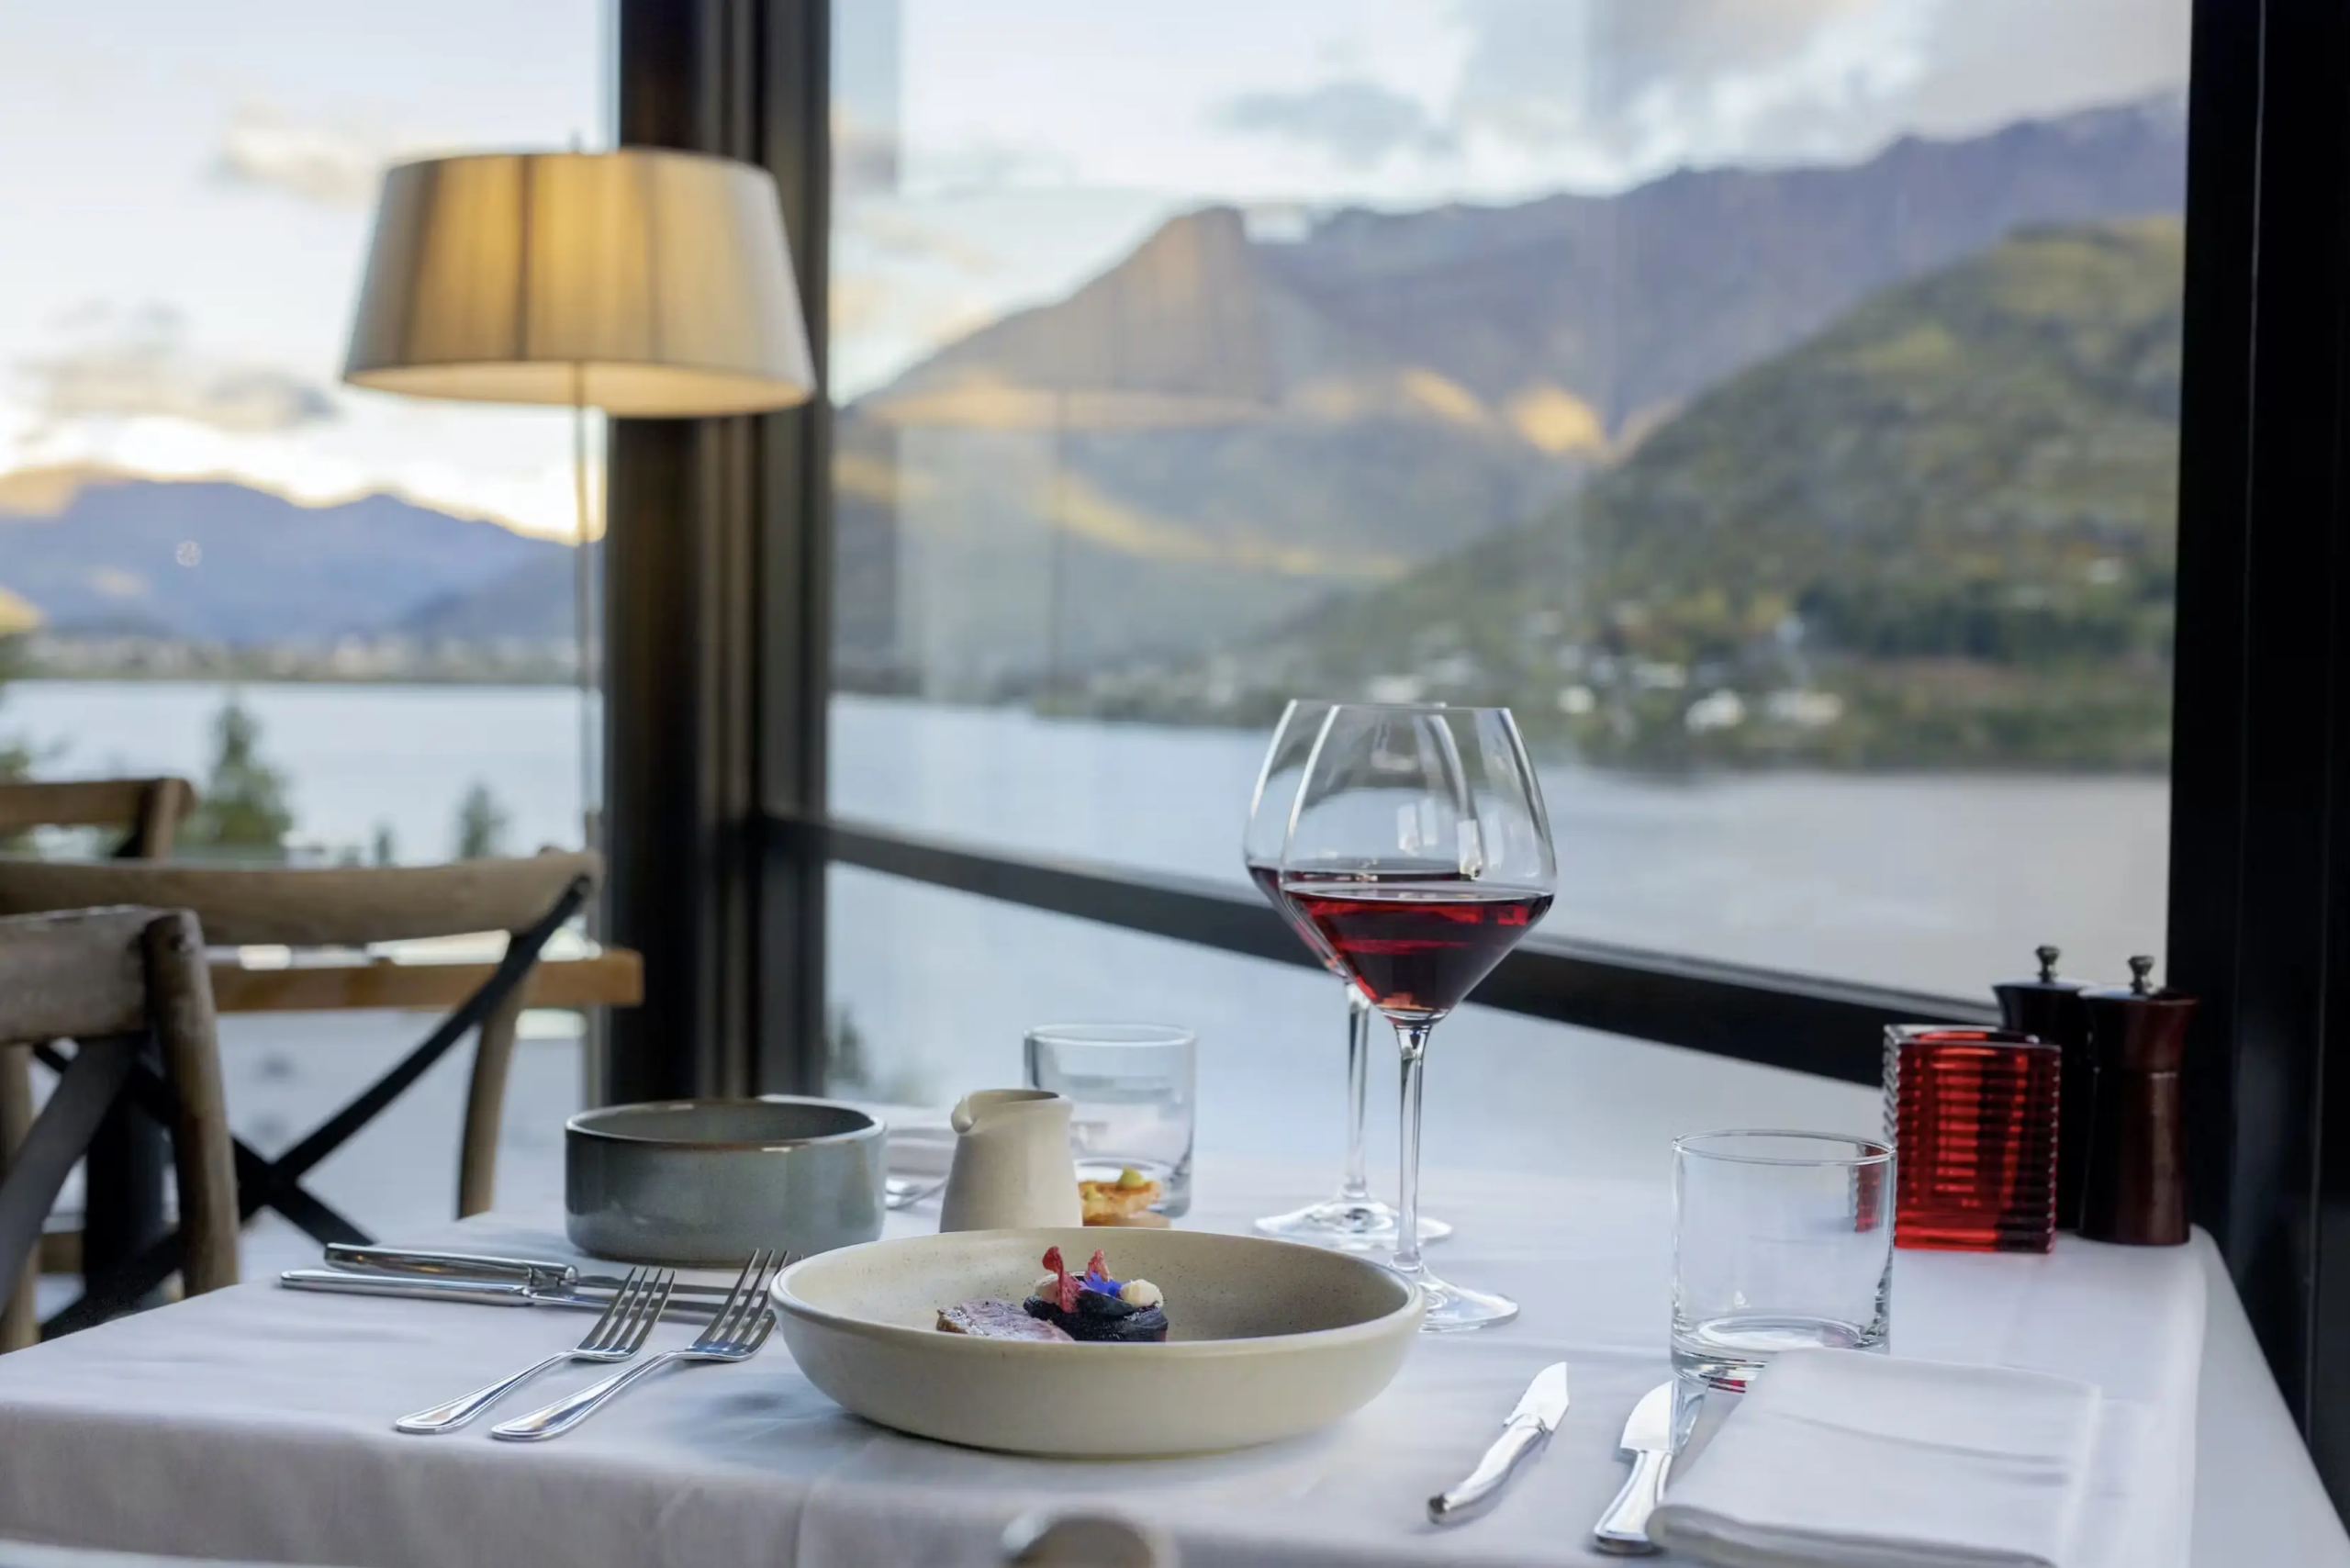 Dine at The Rees Hotel with lake and mountain views at the True South Restaurant